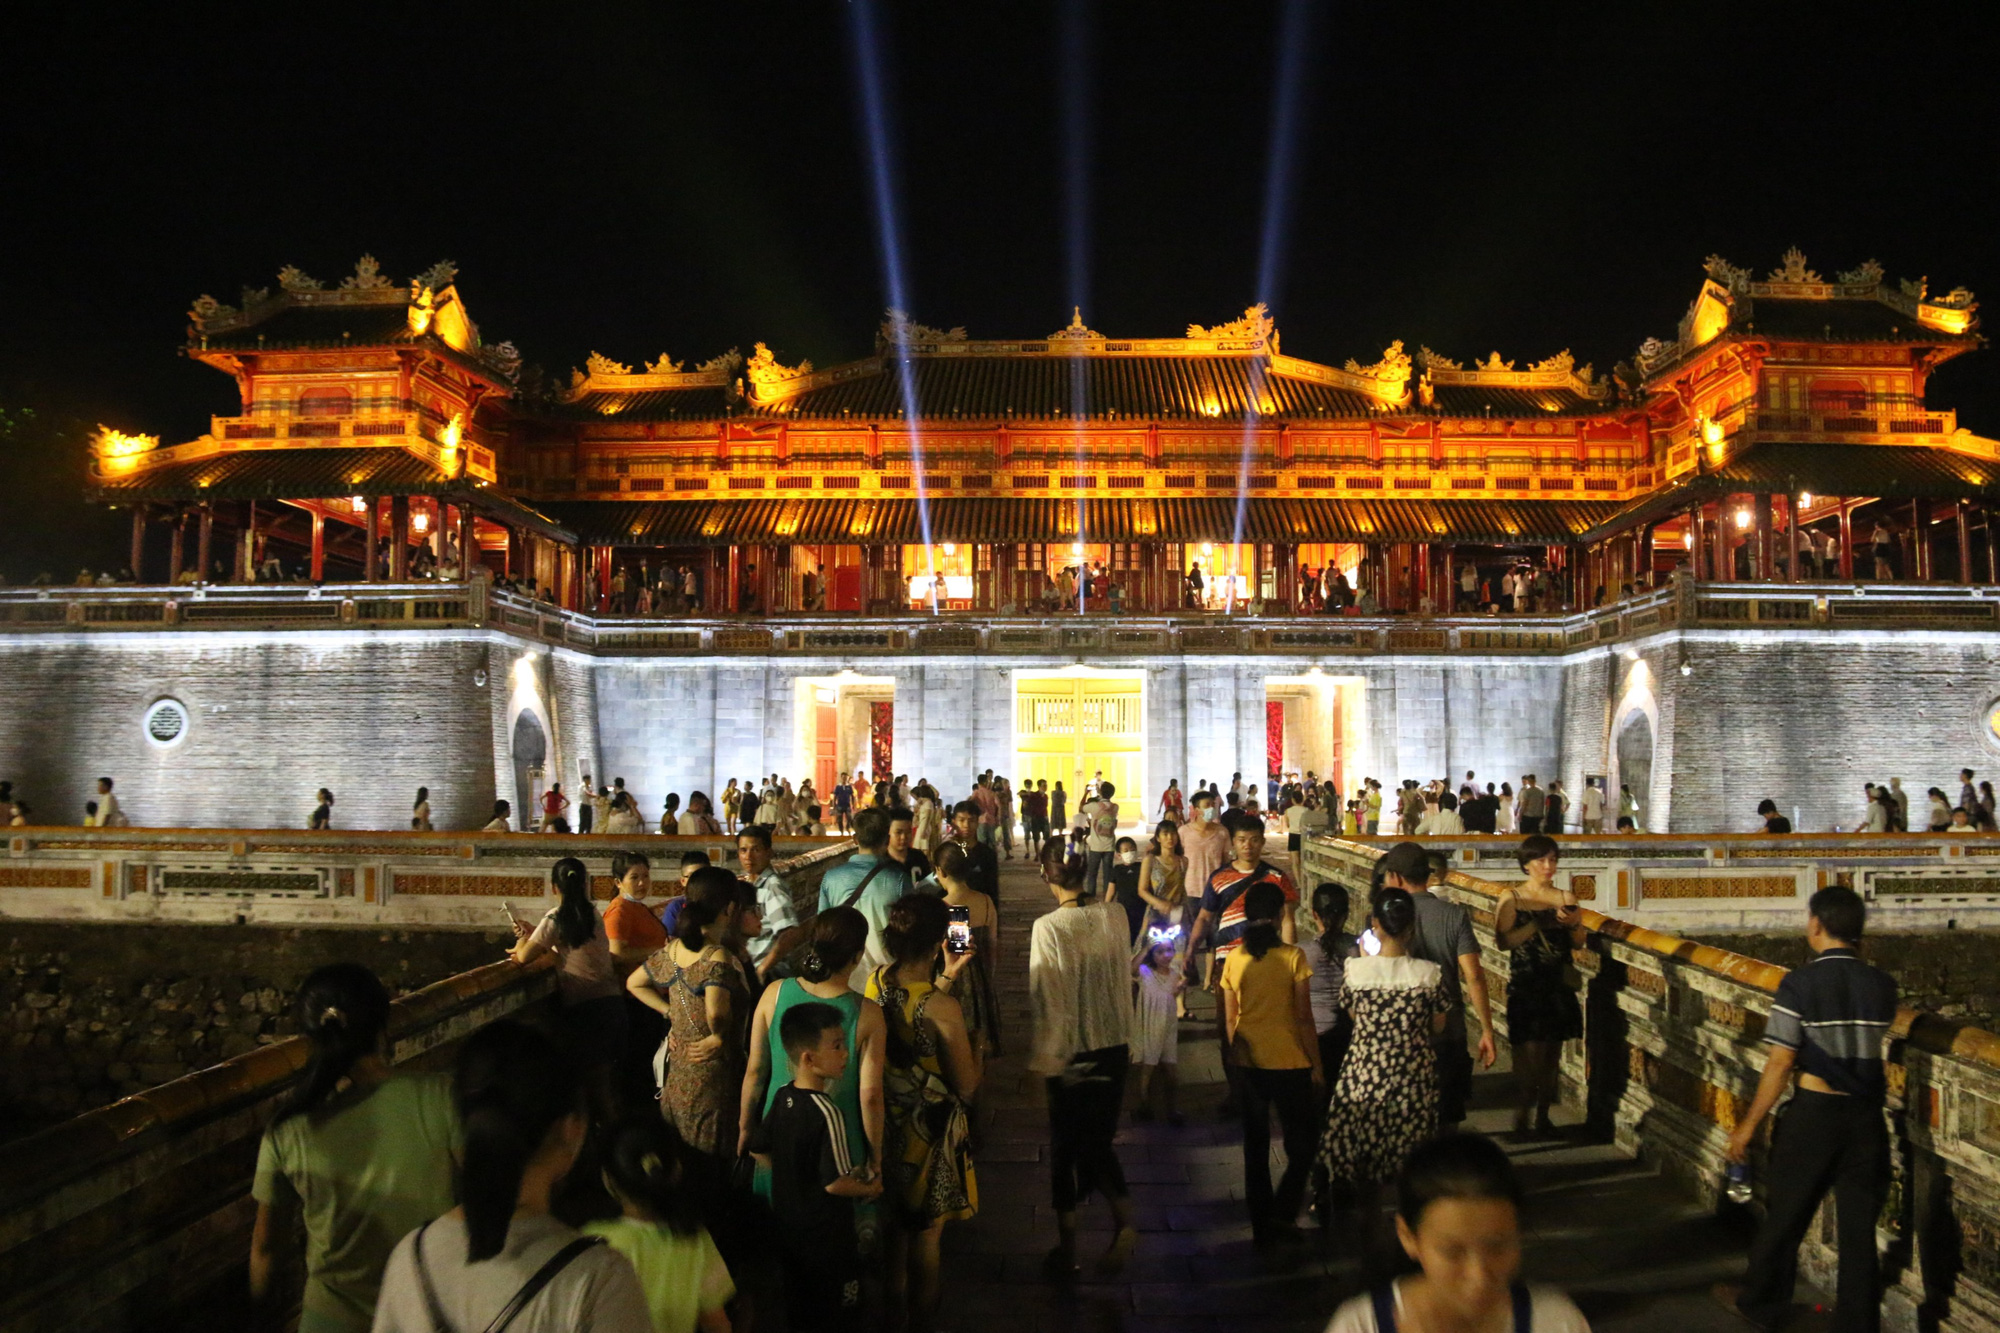 Hue citadel offers free admission for 3 nights